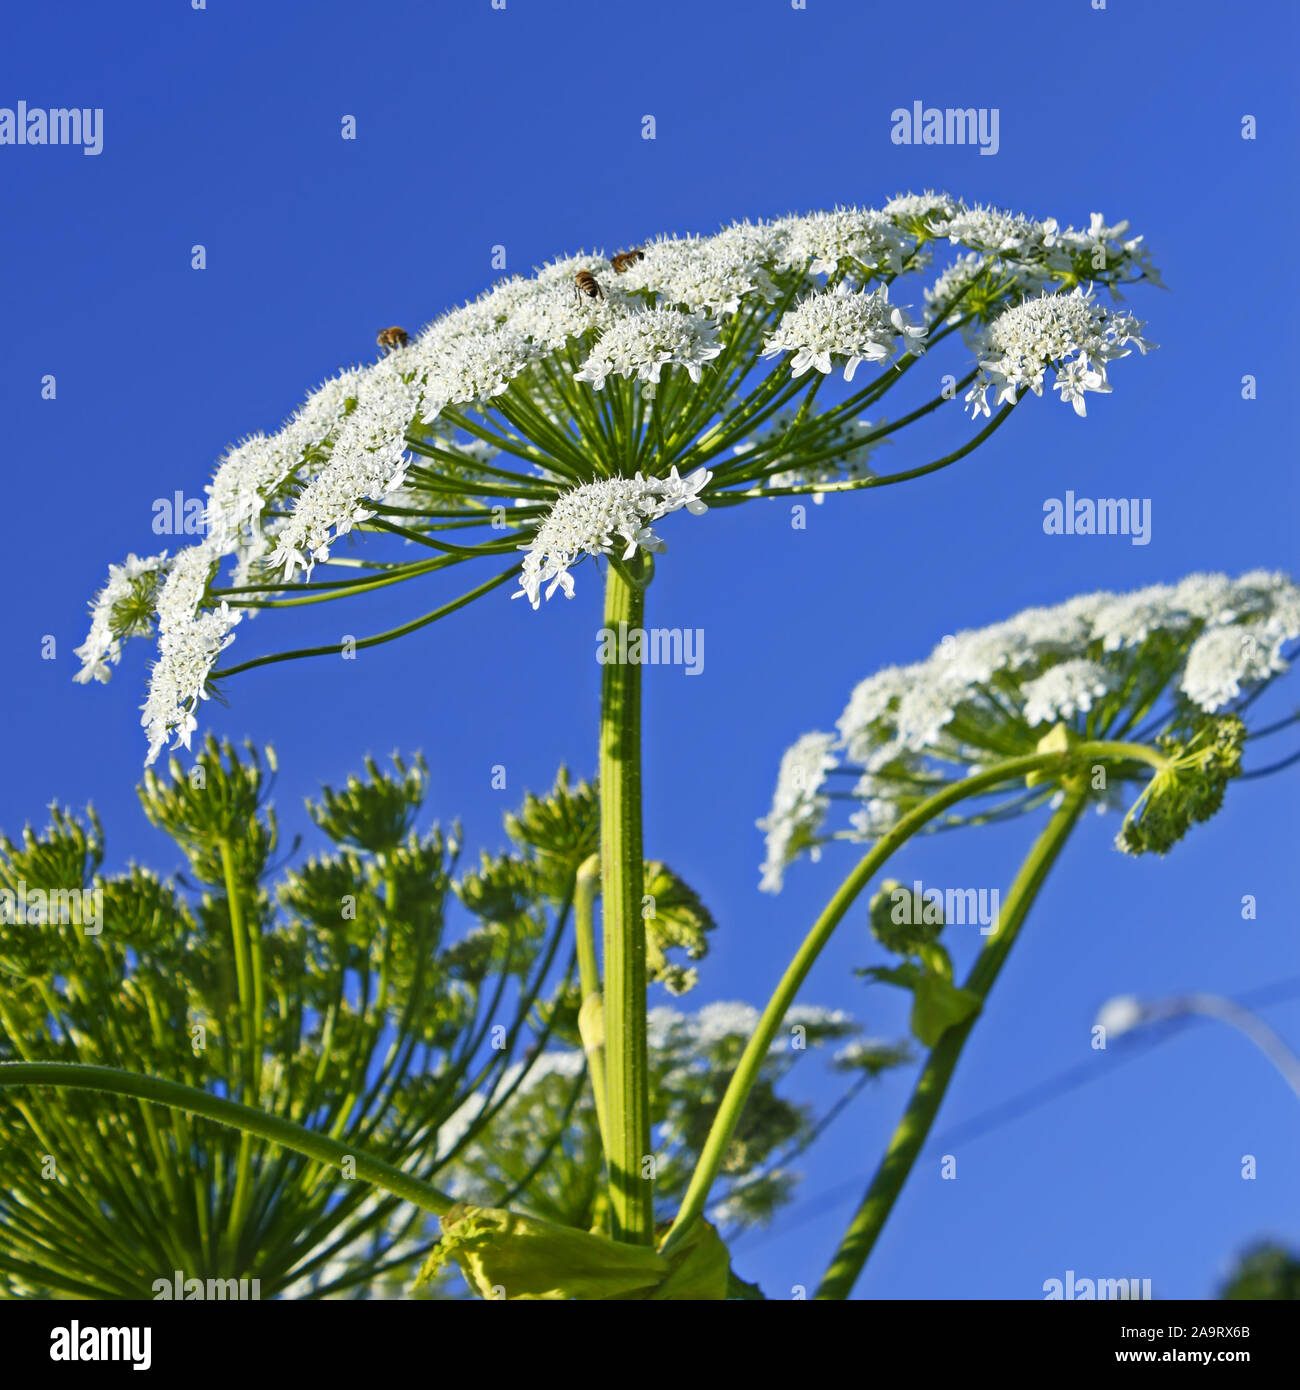 Giant inflorescences of Sosnowsky’s Hogweed plant with bees on it against the background of blue sky. Latin name: heracleum sphondylium Stock Photo